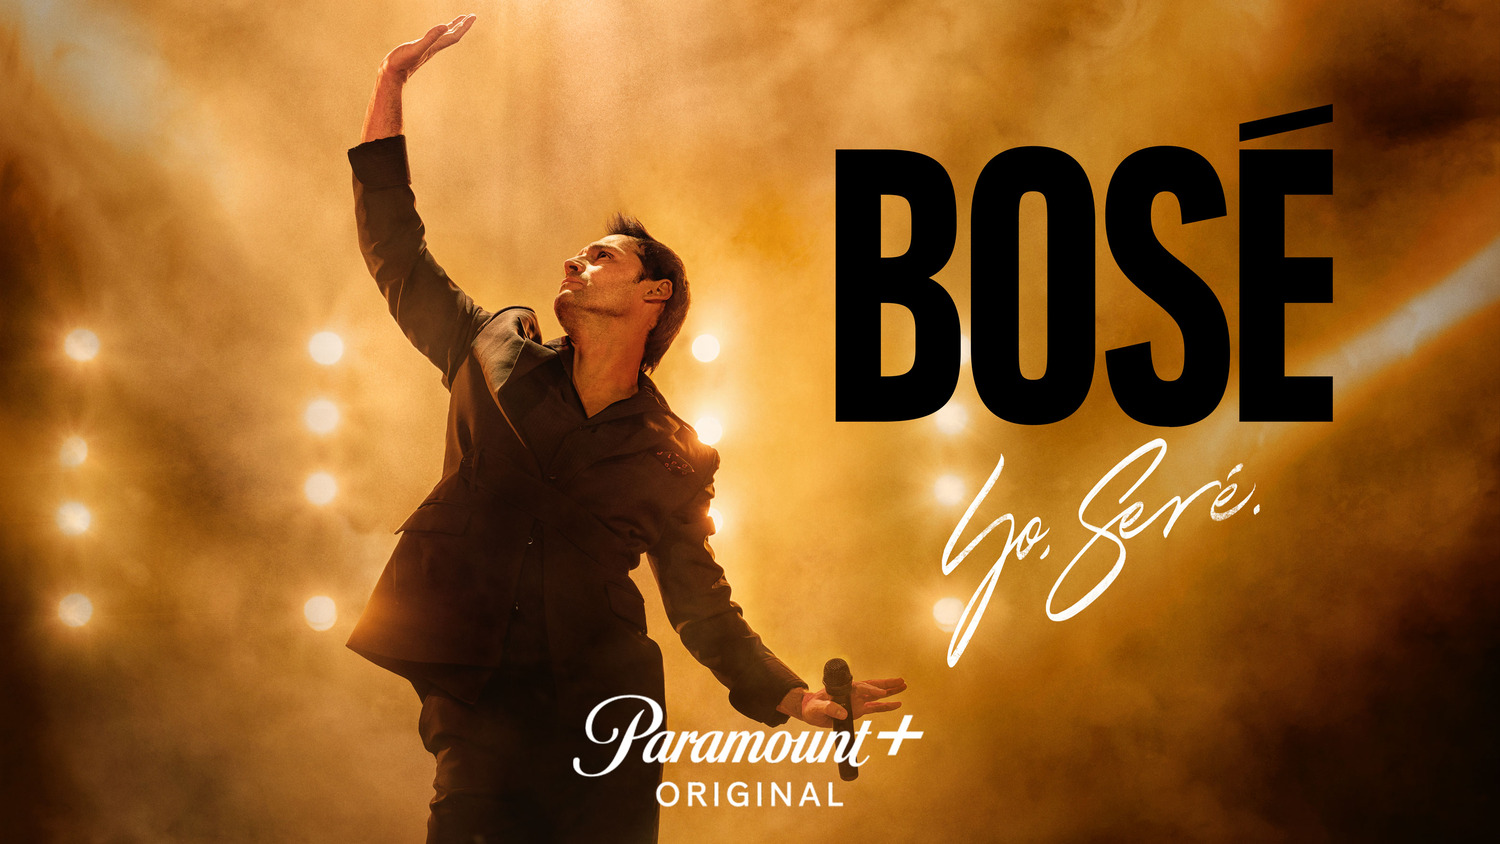 Extra Large TV Poster Image for Bosé (#4 of 4)